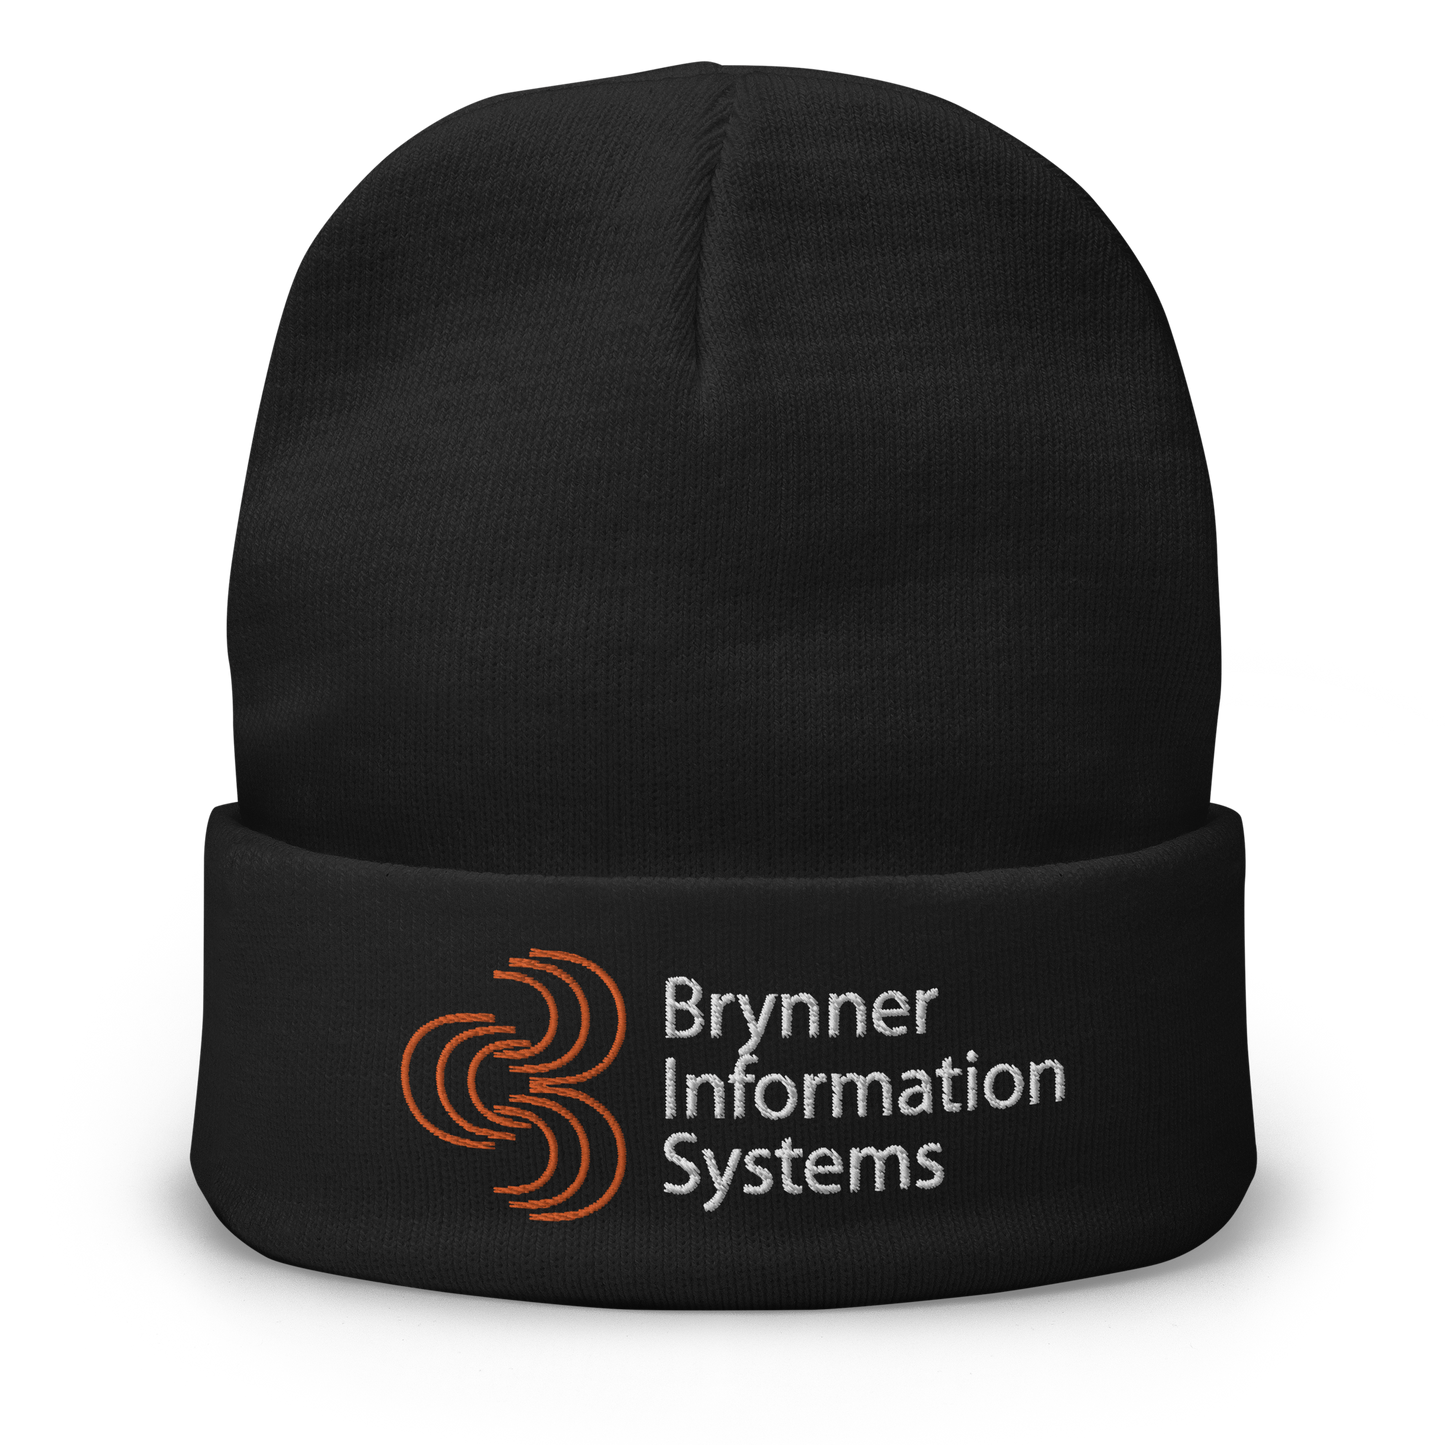 The Brynner Information Systems Beanie